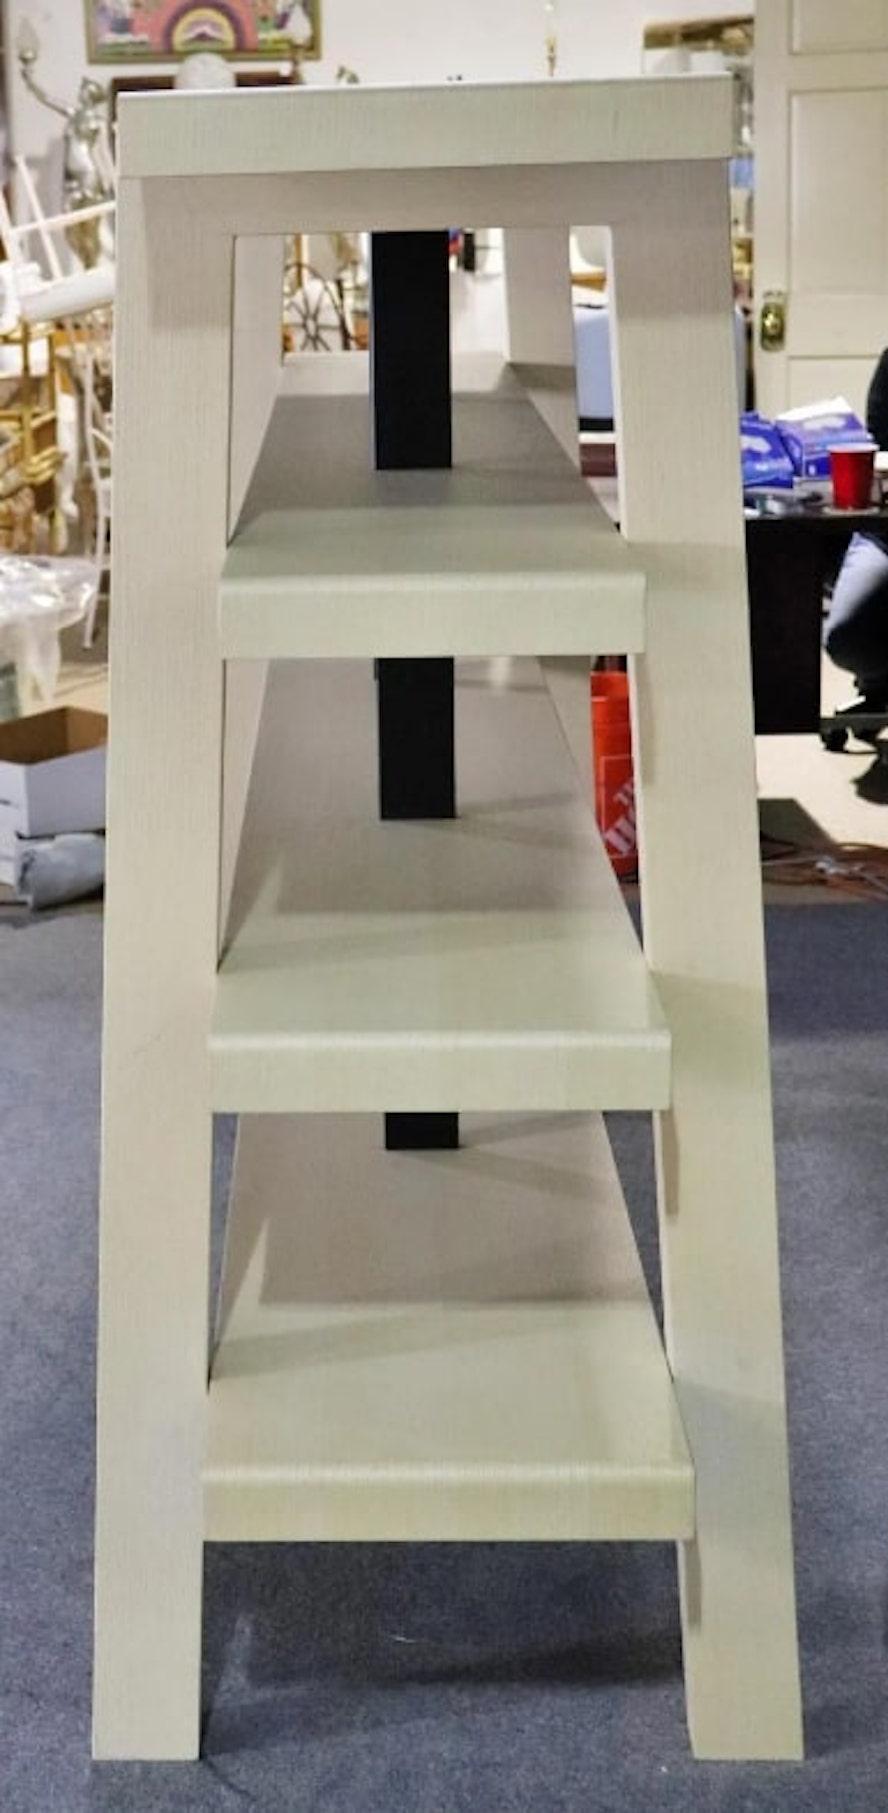 Modern four shelf standing bookcase, made of bentwood panels of laminate oak. Metal supports connect the shelves for a sturdy unit.
Please confirm location NY or NJ.